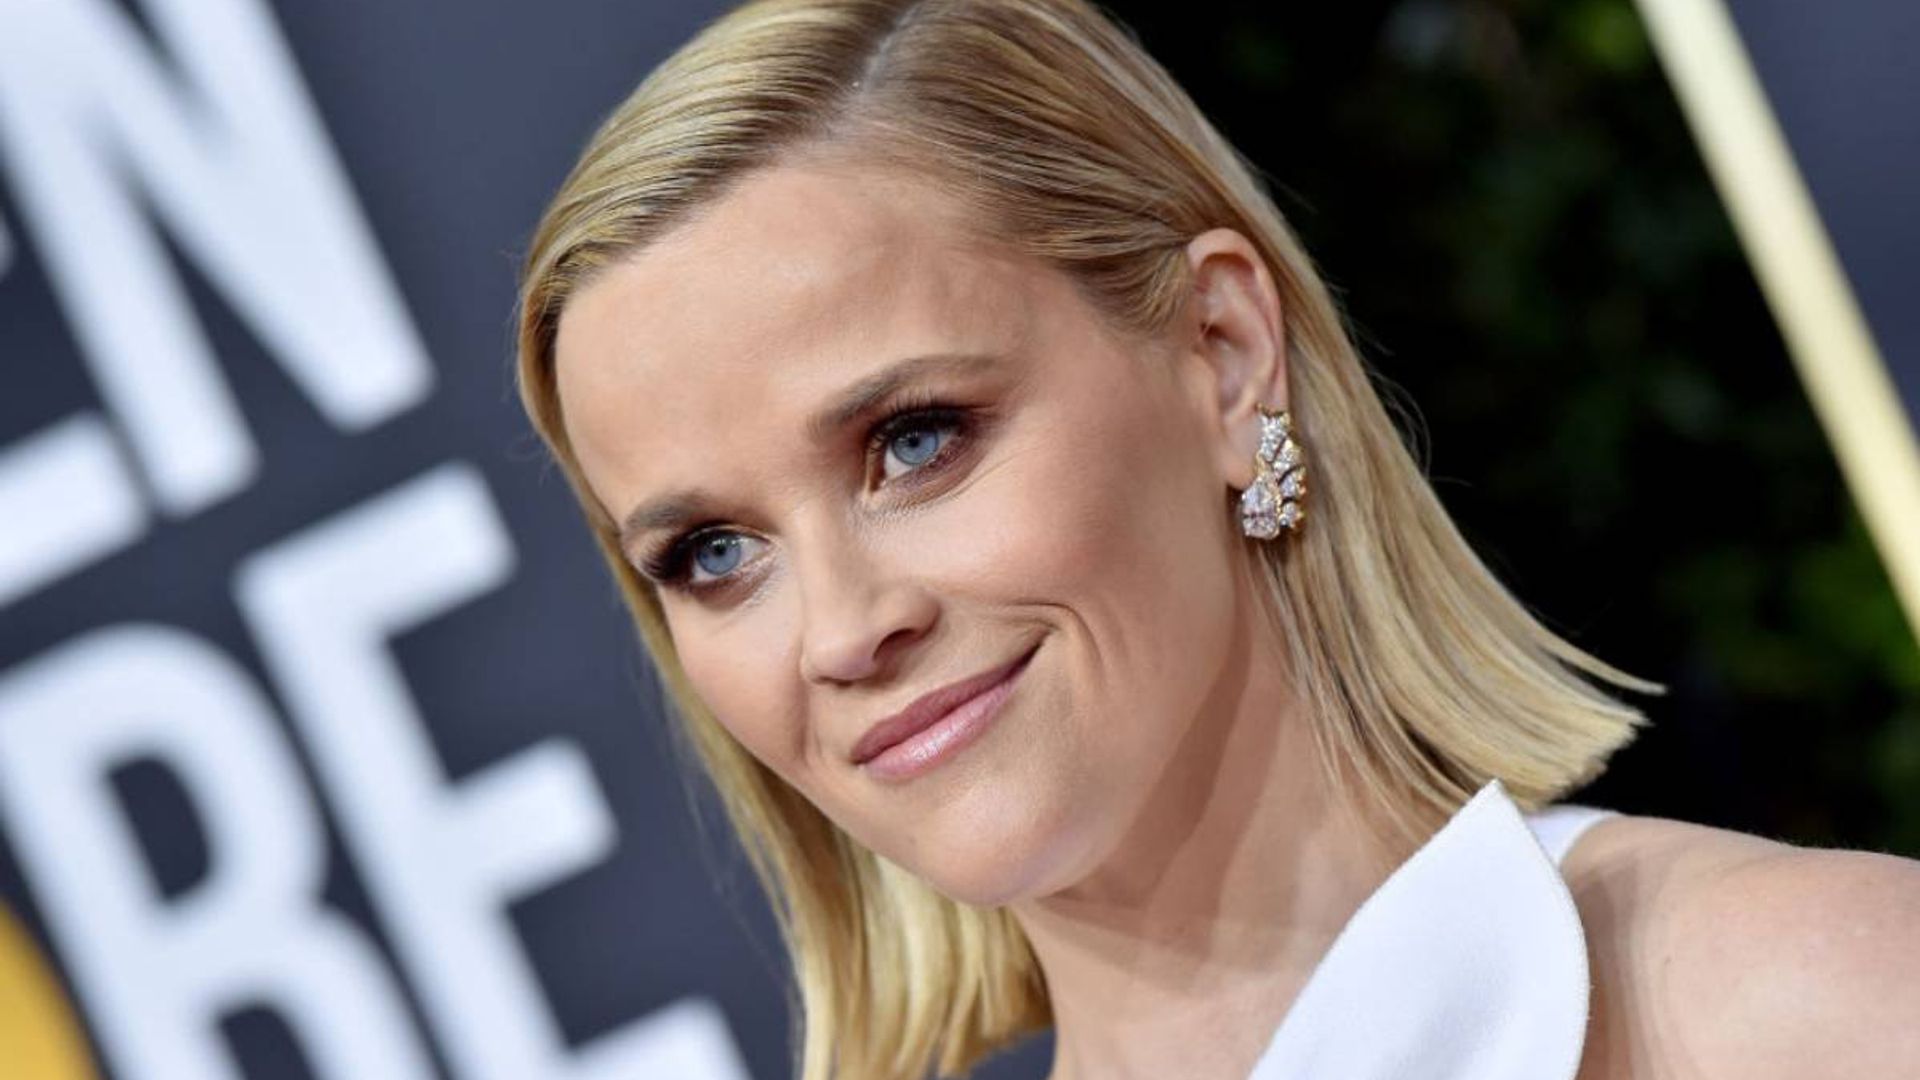 Reese Witherspoon is the ultimate snow bunny in all-white ski outfit fans go wild for